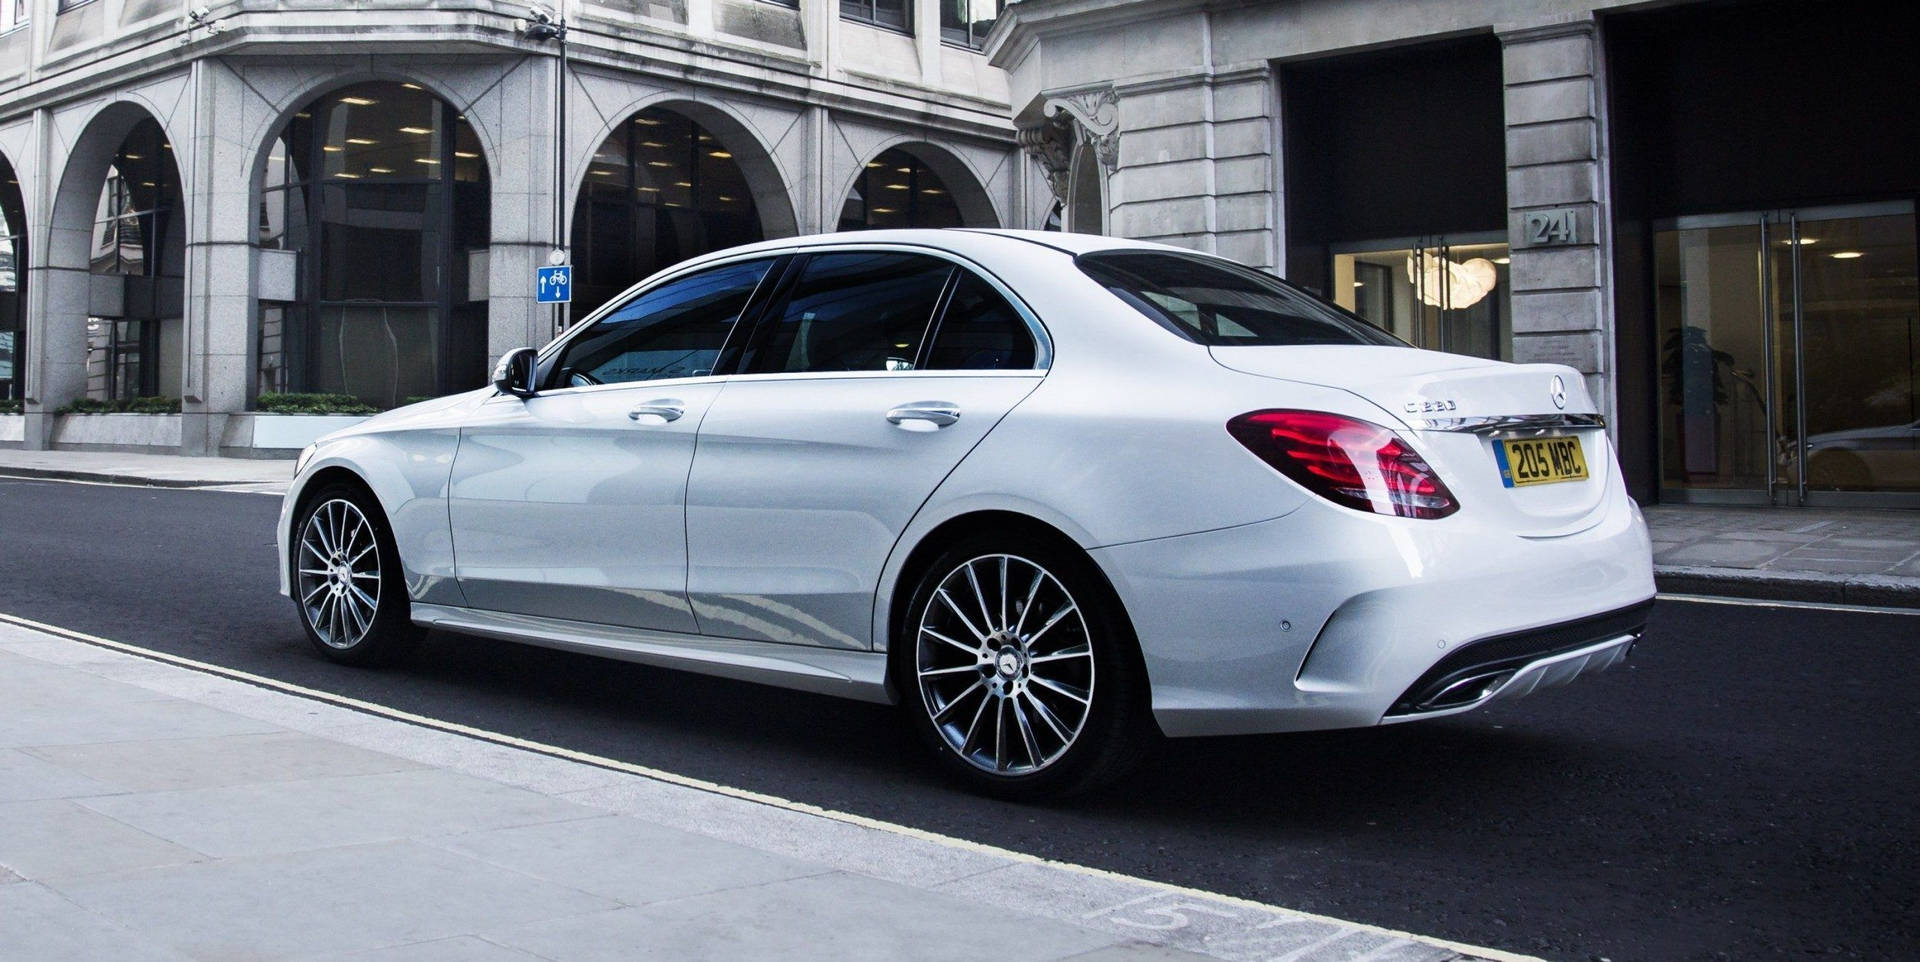 Majestic Mercedes Benz C300 On The Move Background